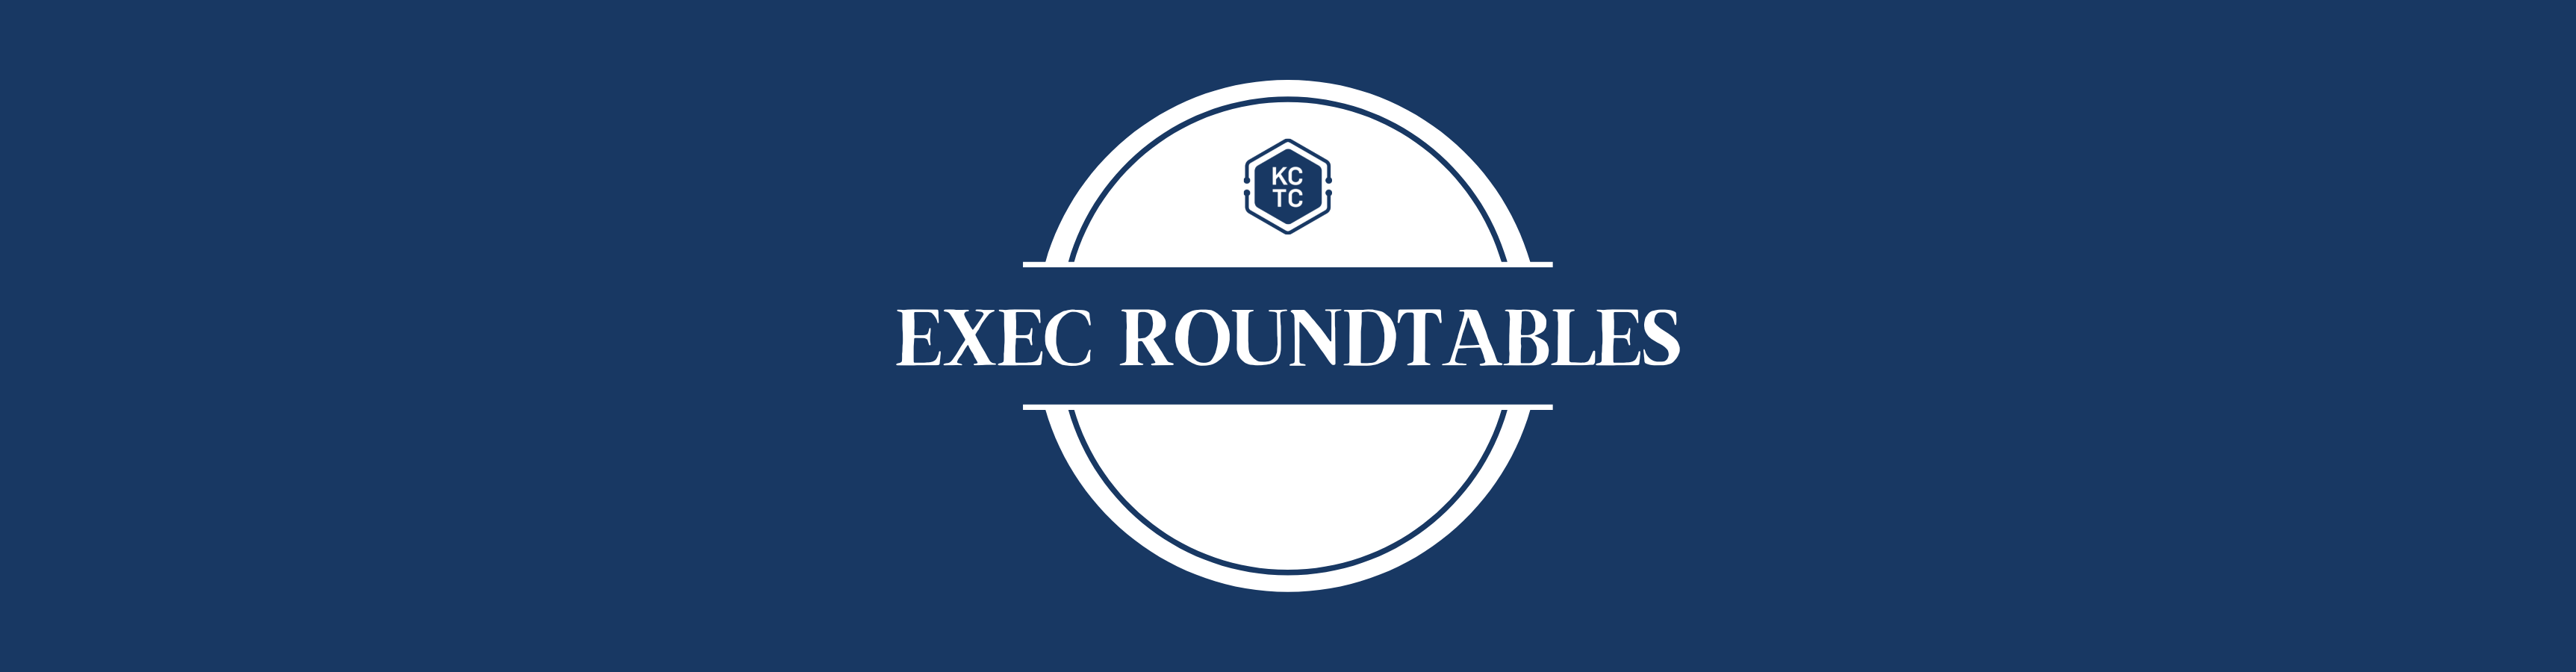 Exec Roundtables Graphic (1)